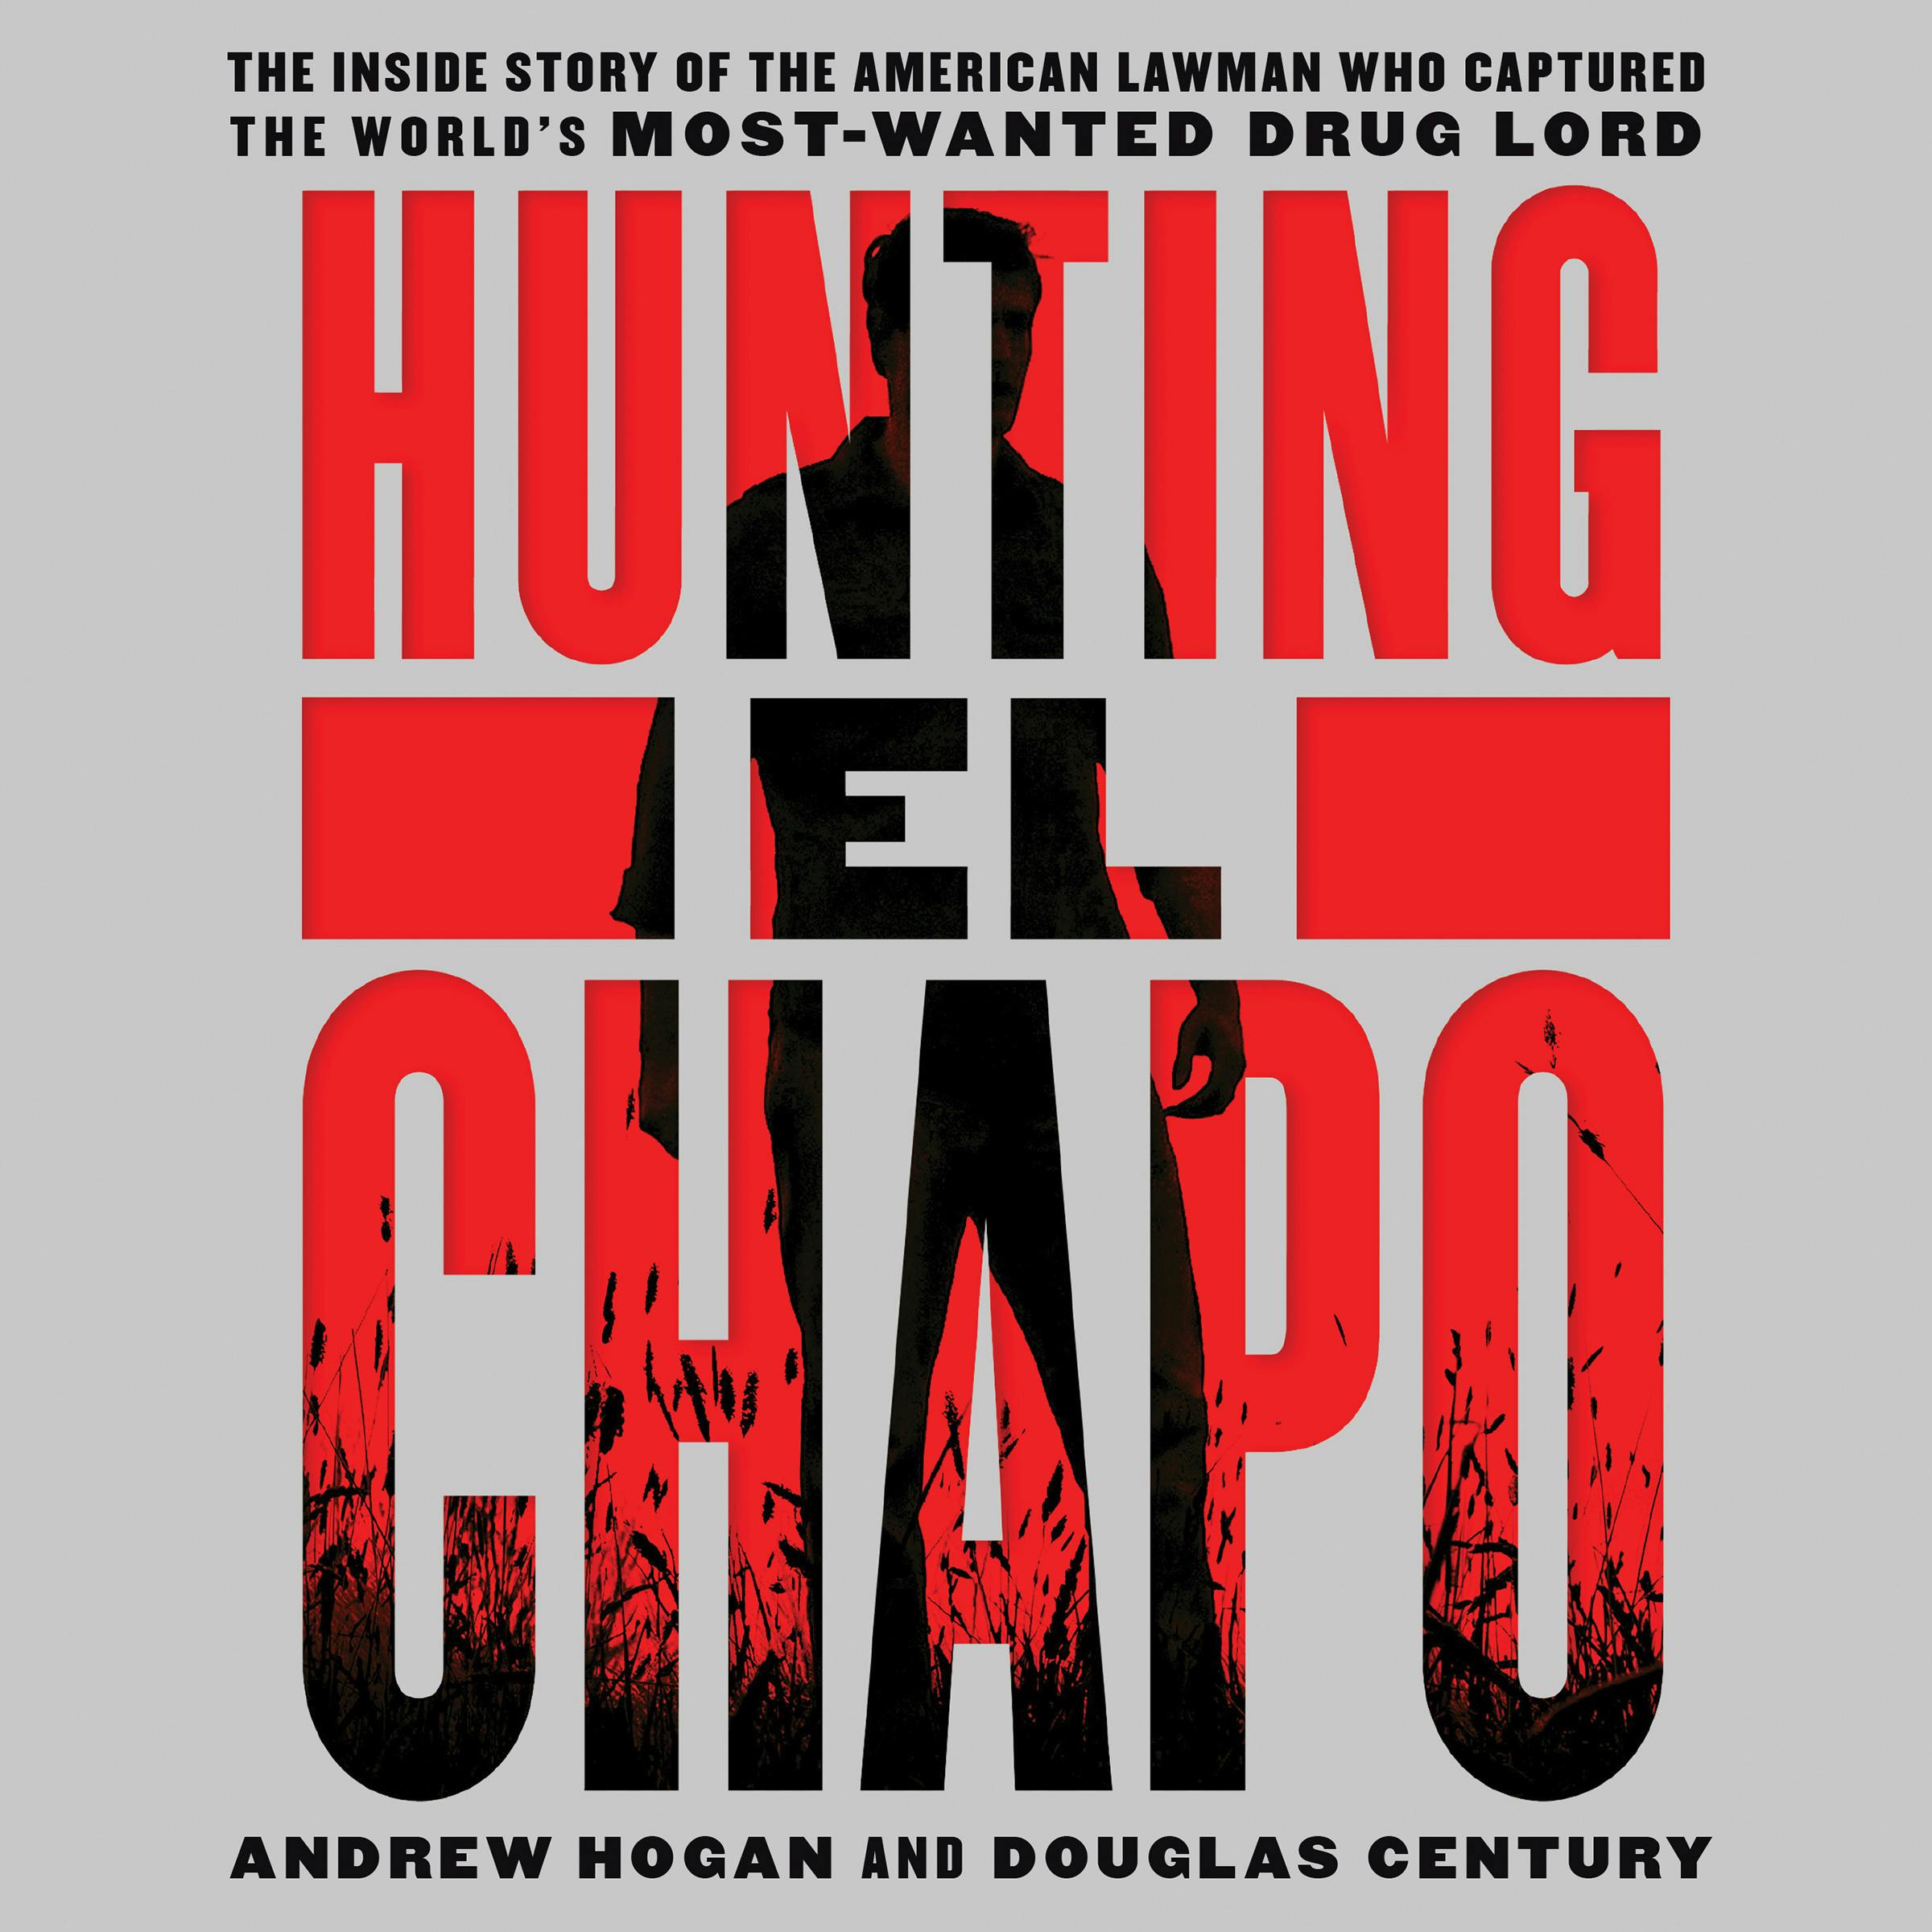 Hunting El Chapo: The Inside Story of the American Lawman Who Captured the World's Most-Wanted Drug Lord - Andrew Hogan, Douglas Century